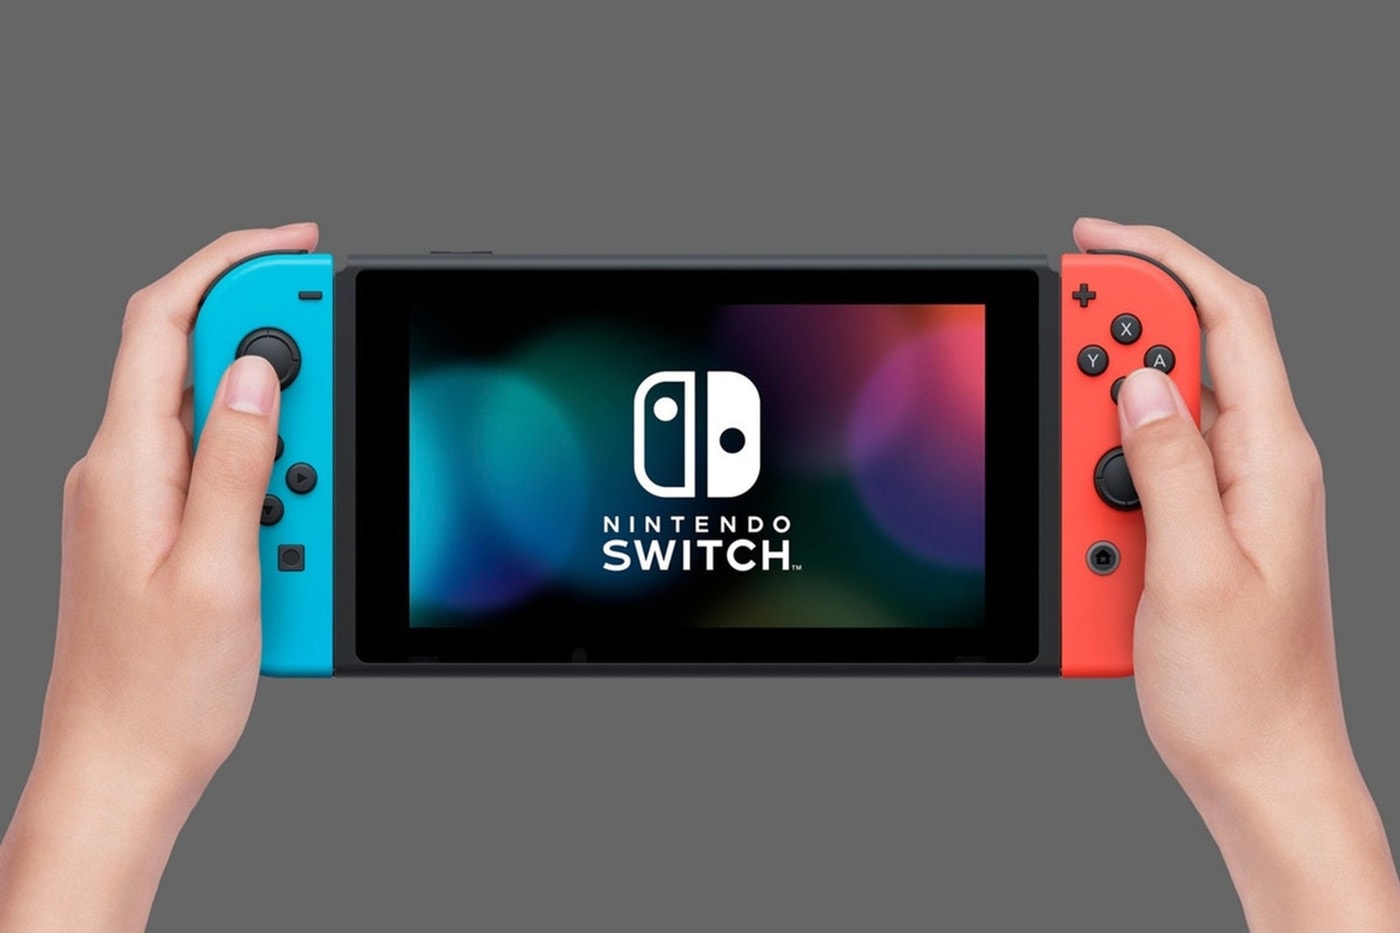 Nintendo Switch Two New Consoles Gaming Release Information Speculation Rumours Drops Announcement High End Model Serious Gamers Prototype  